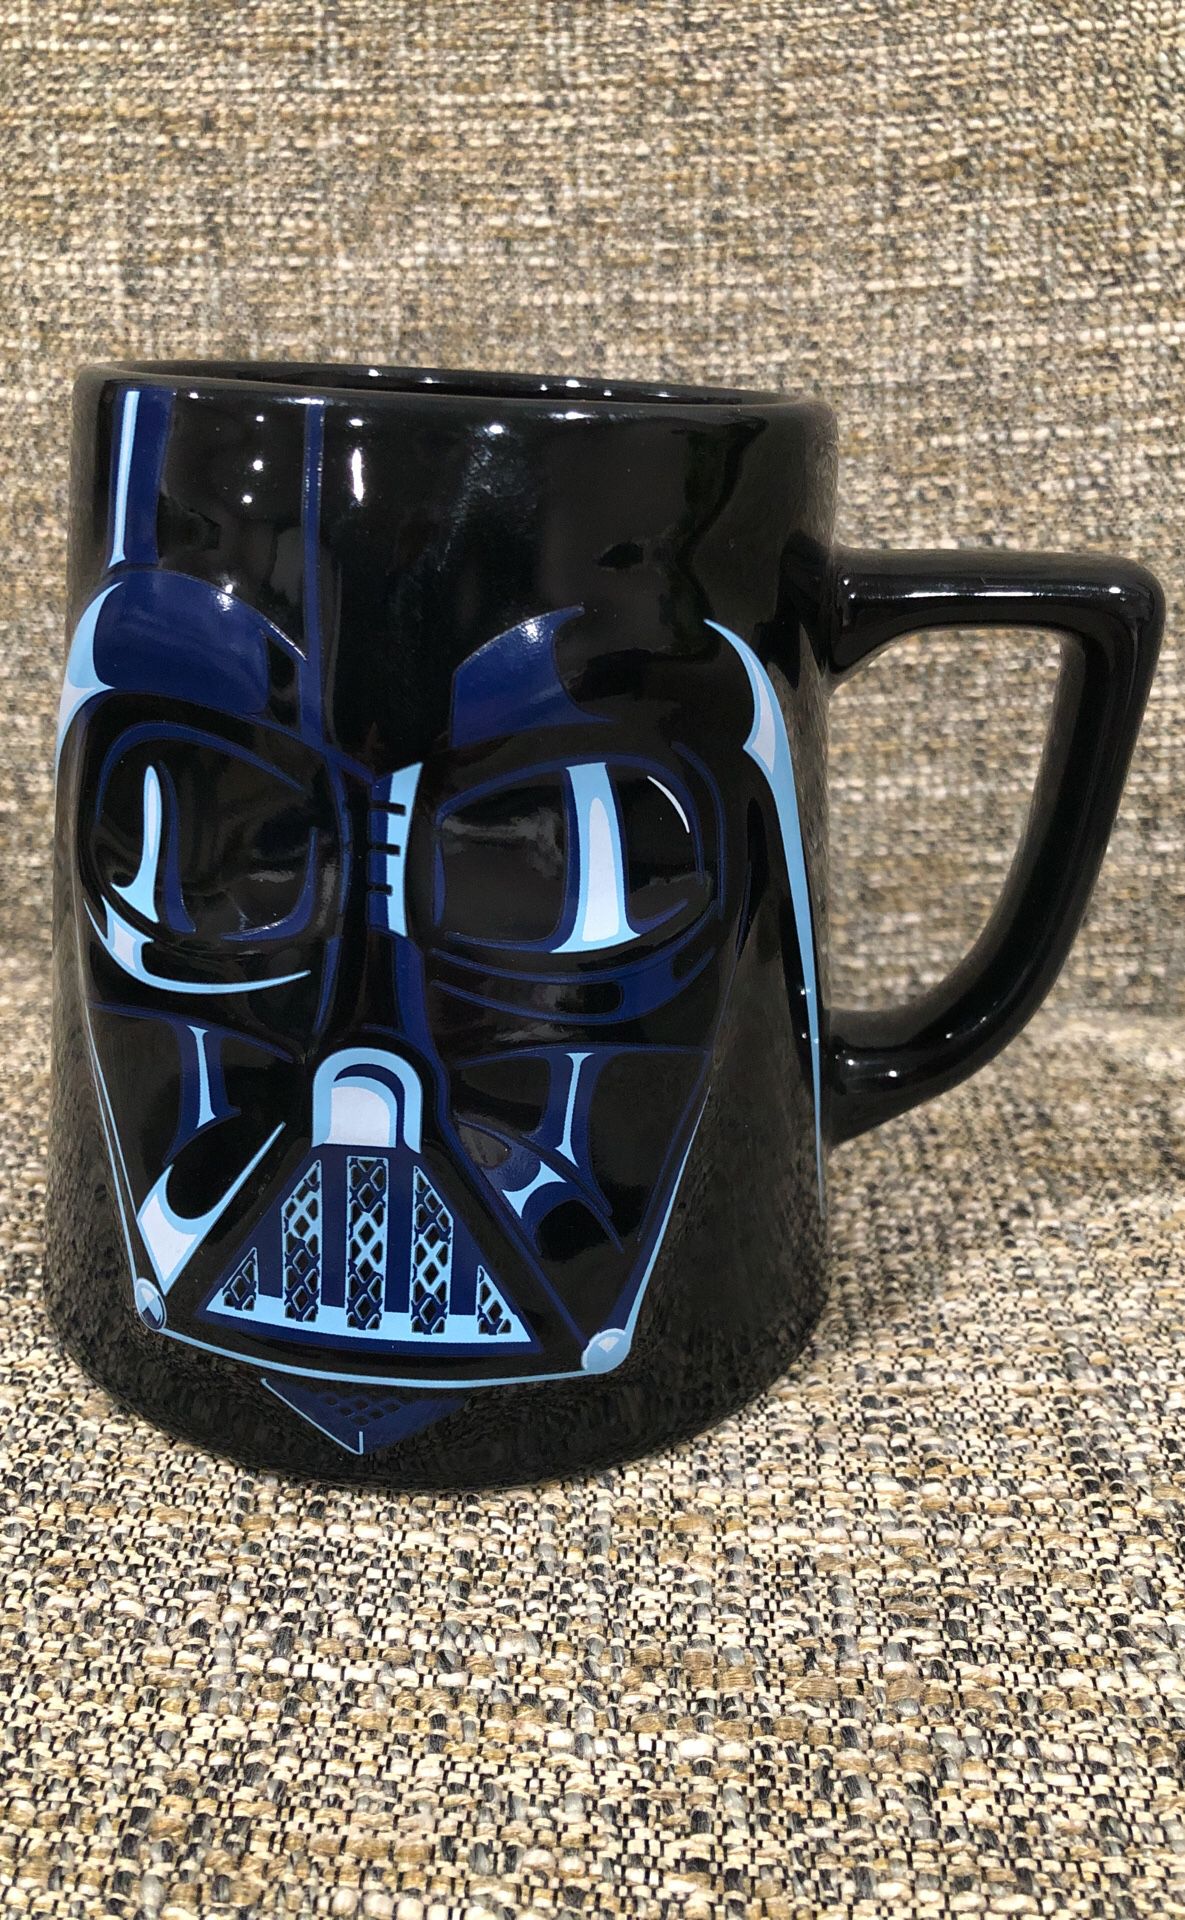 Star Wars Coffee mug. Please see all the pictures and read the description